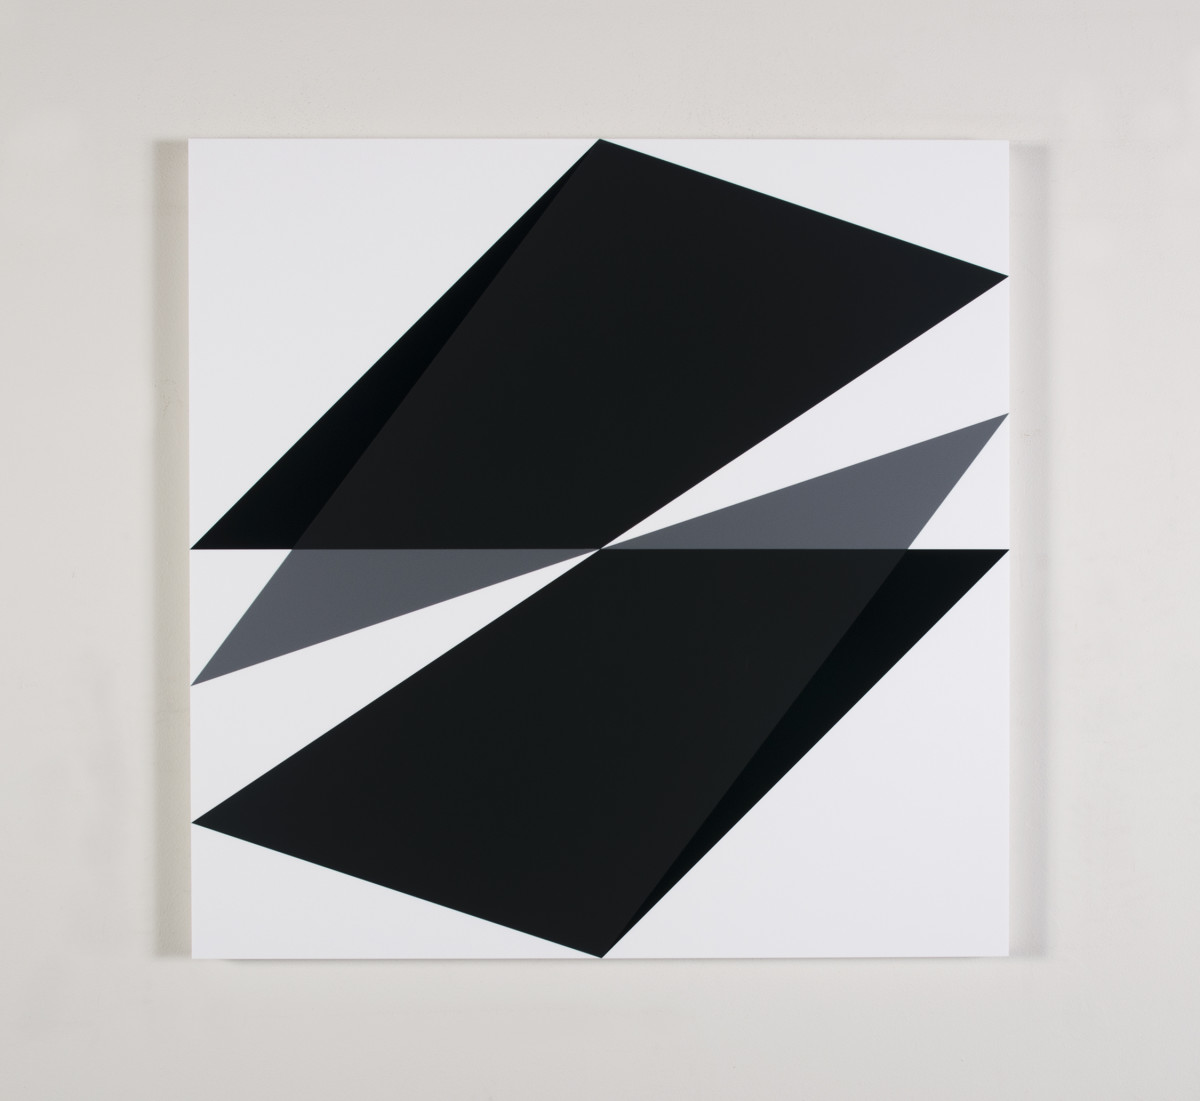 Composition in 3001 Gray, 5425 Sign Gray, and 2026 Black on 3015 White by Brian Zink 